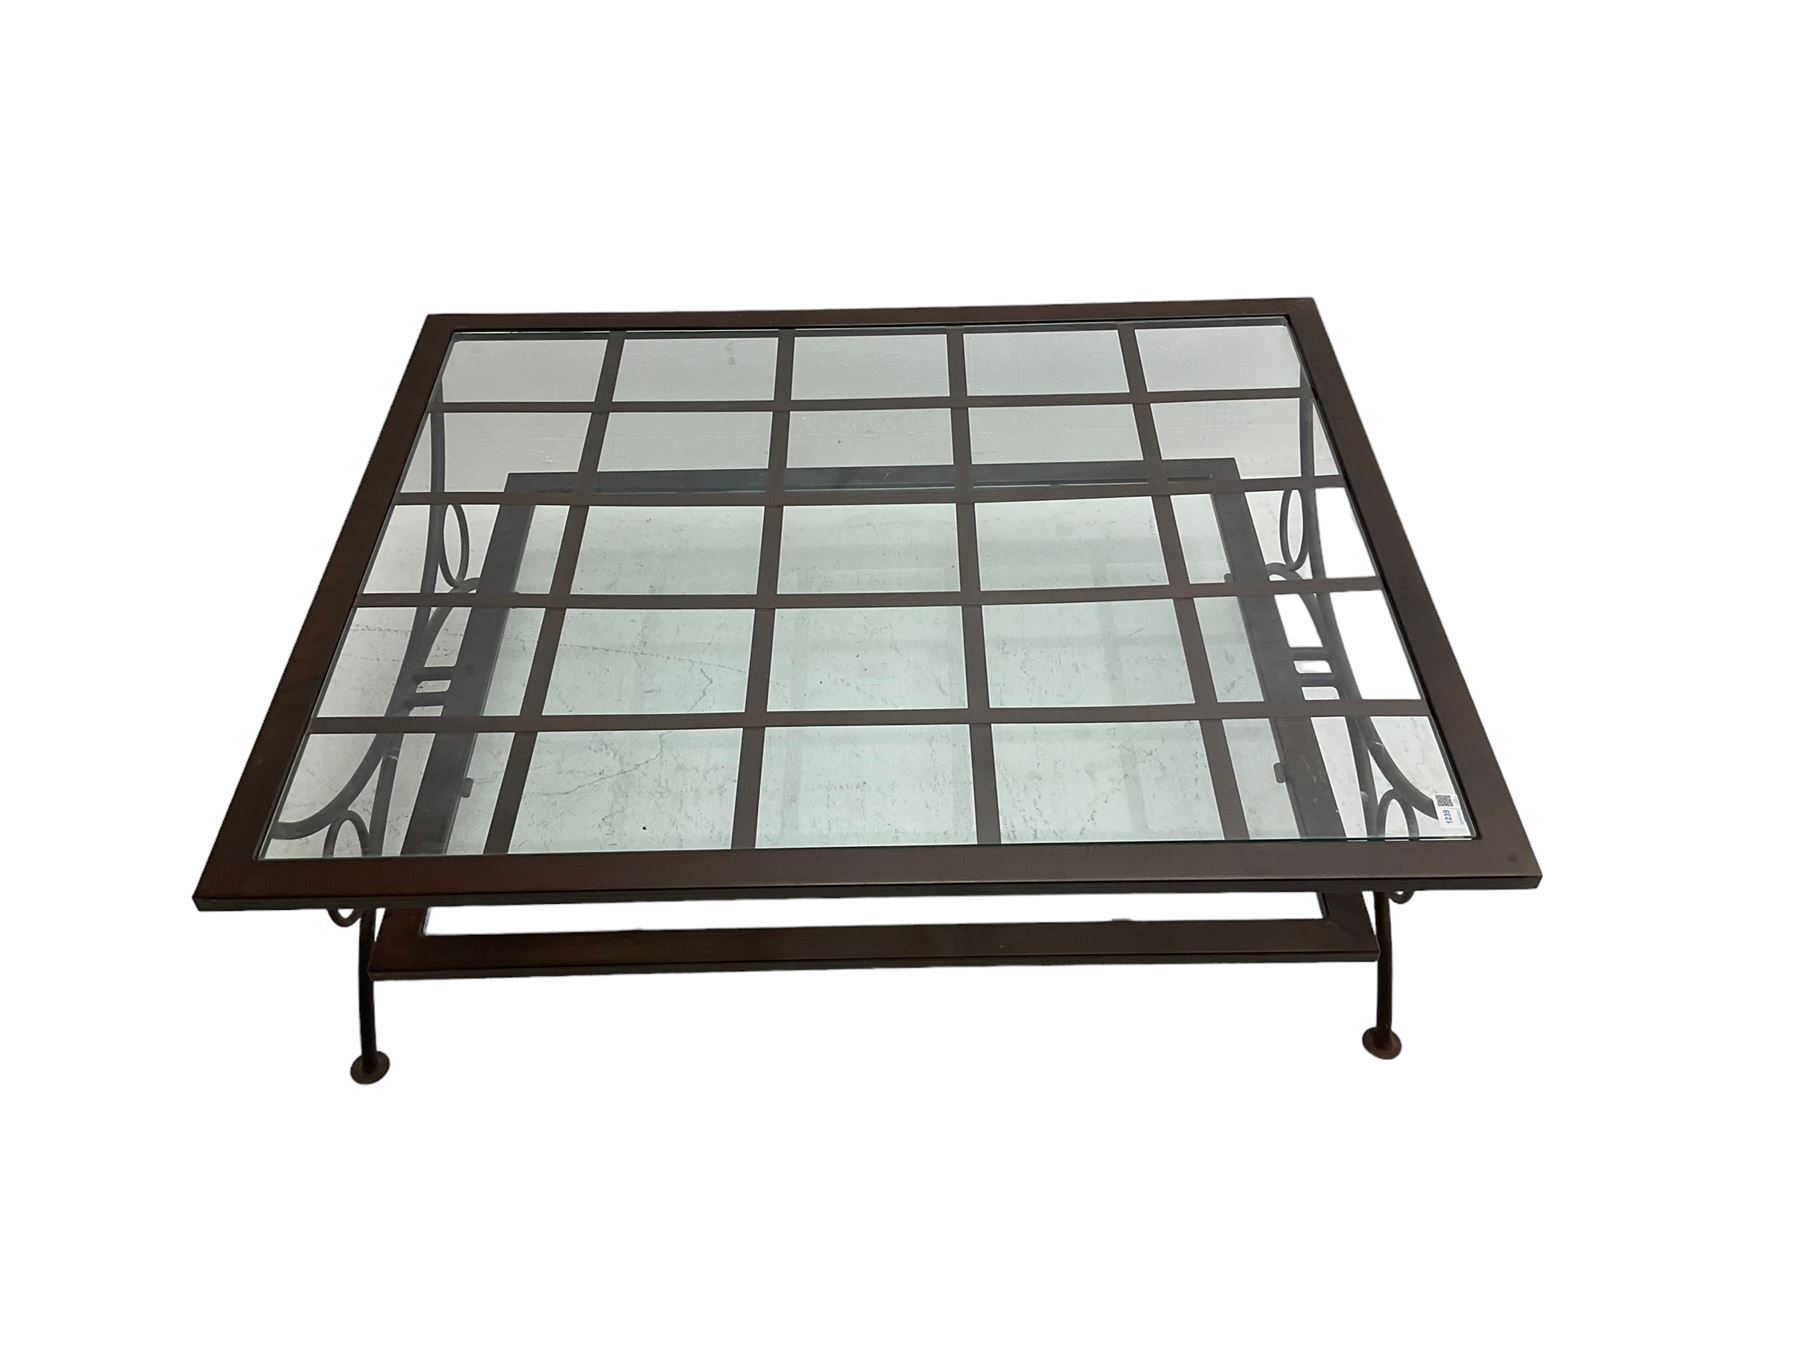 Wrought metal coffee table - Image 2 of 6